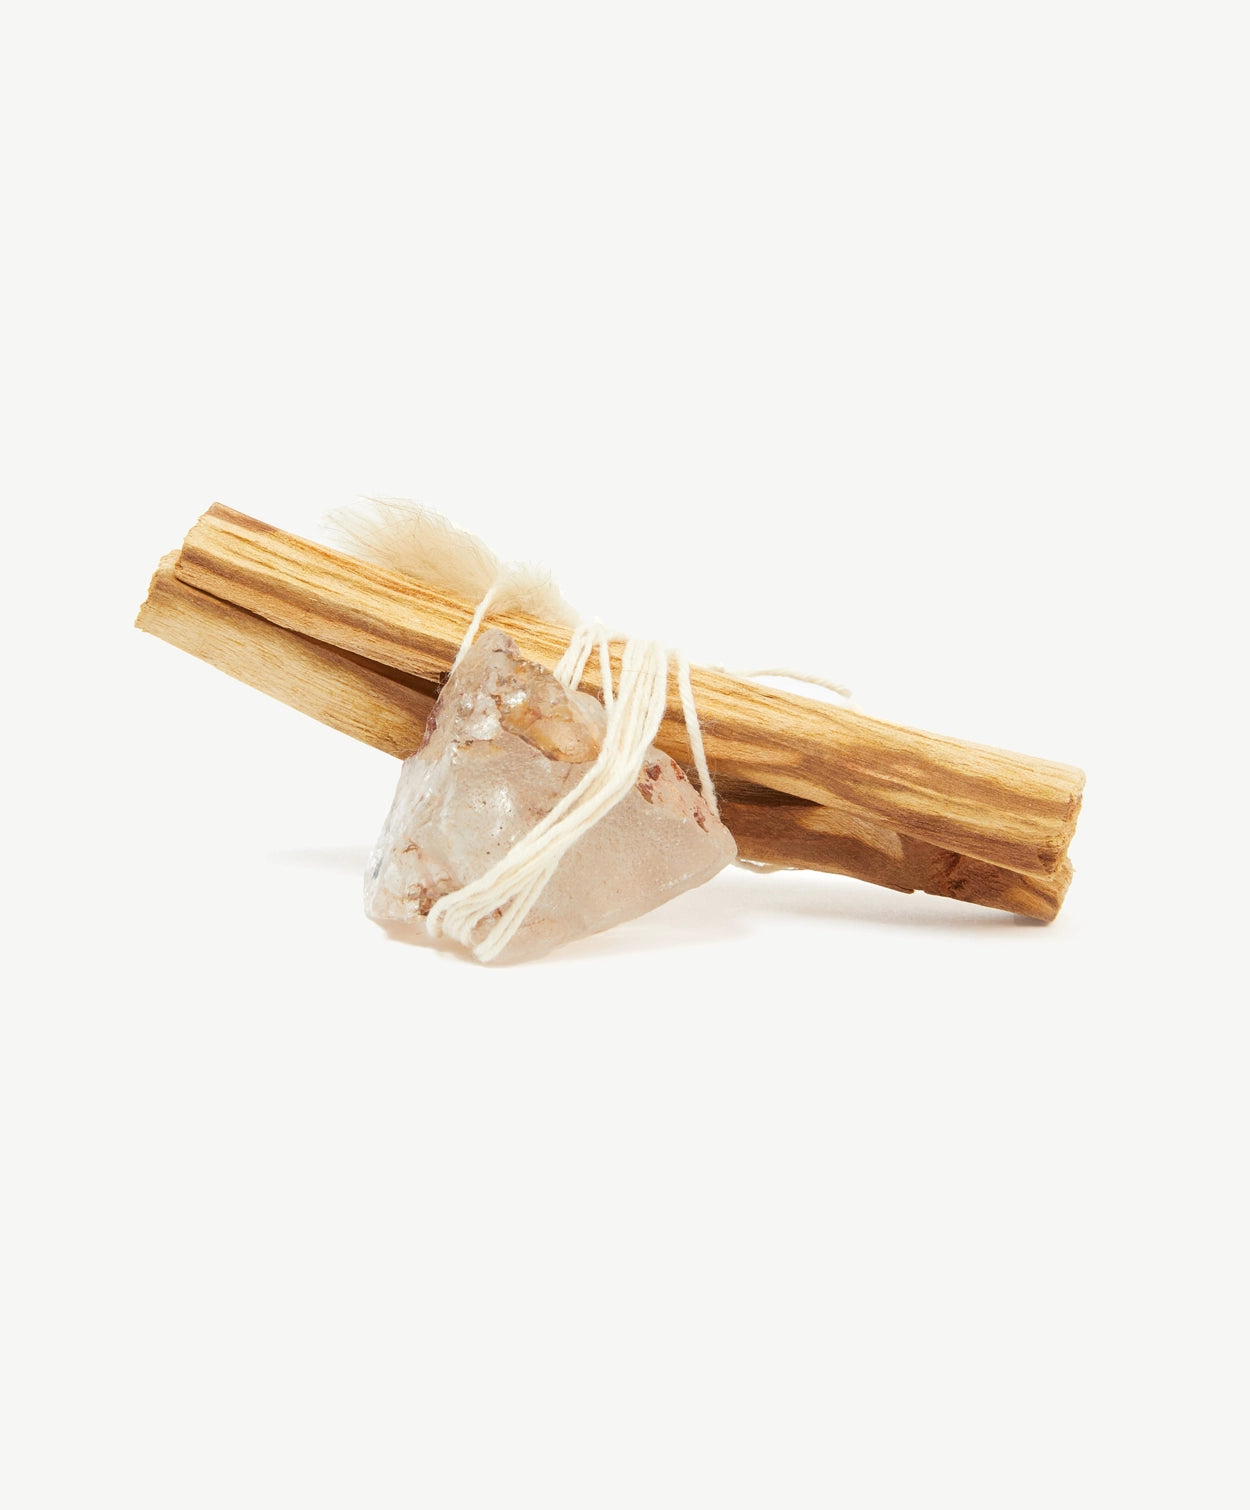 A Palot Santo stick tied to a transparent crystal with white thread string on a white background.